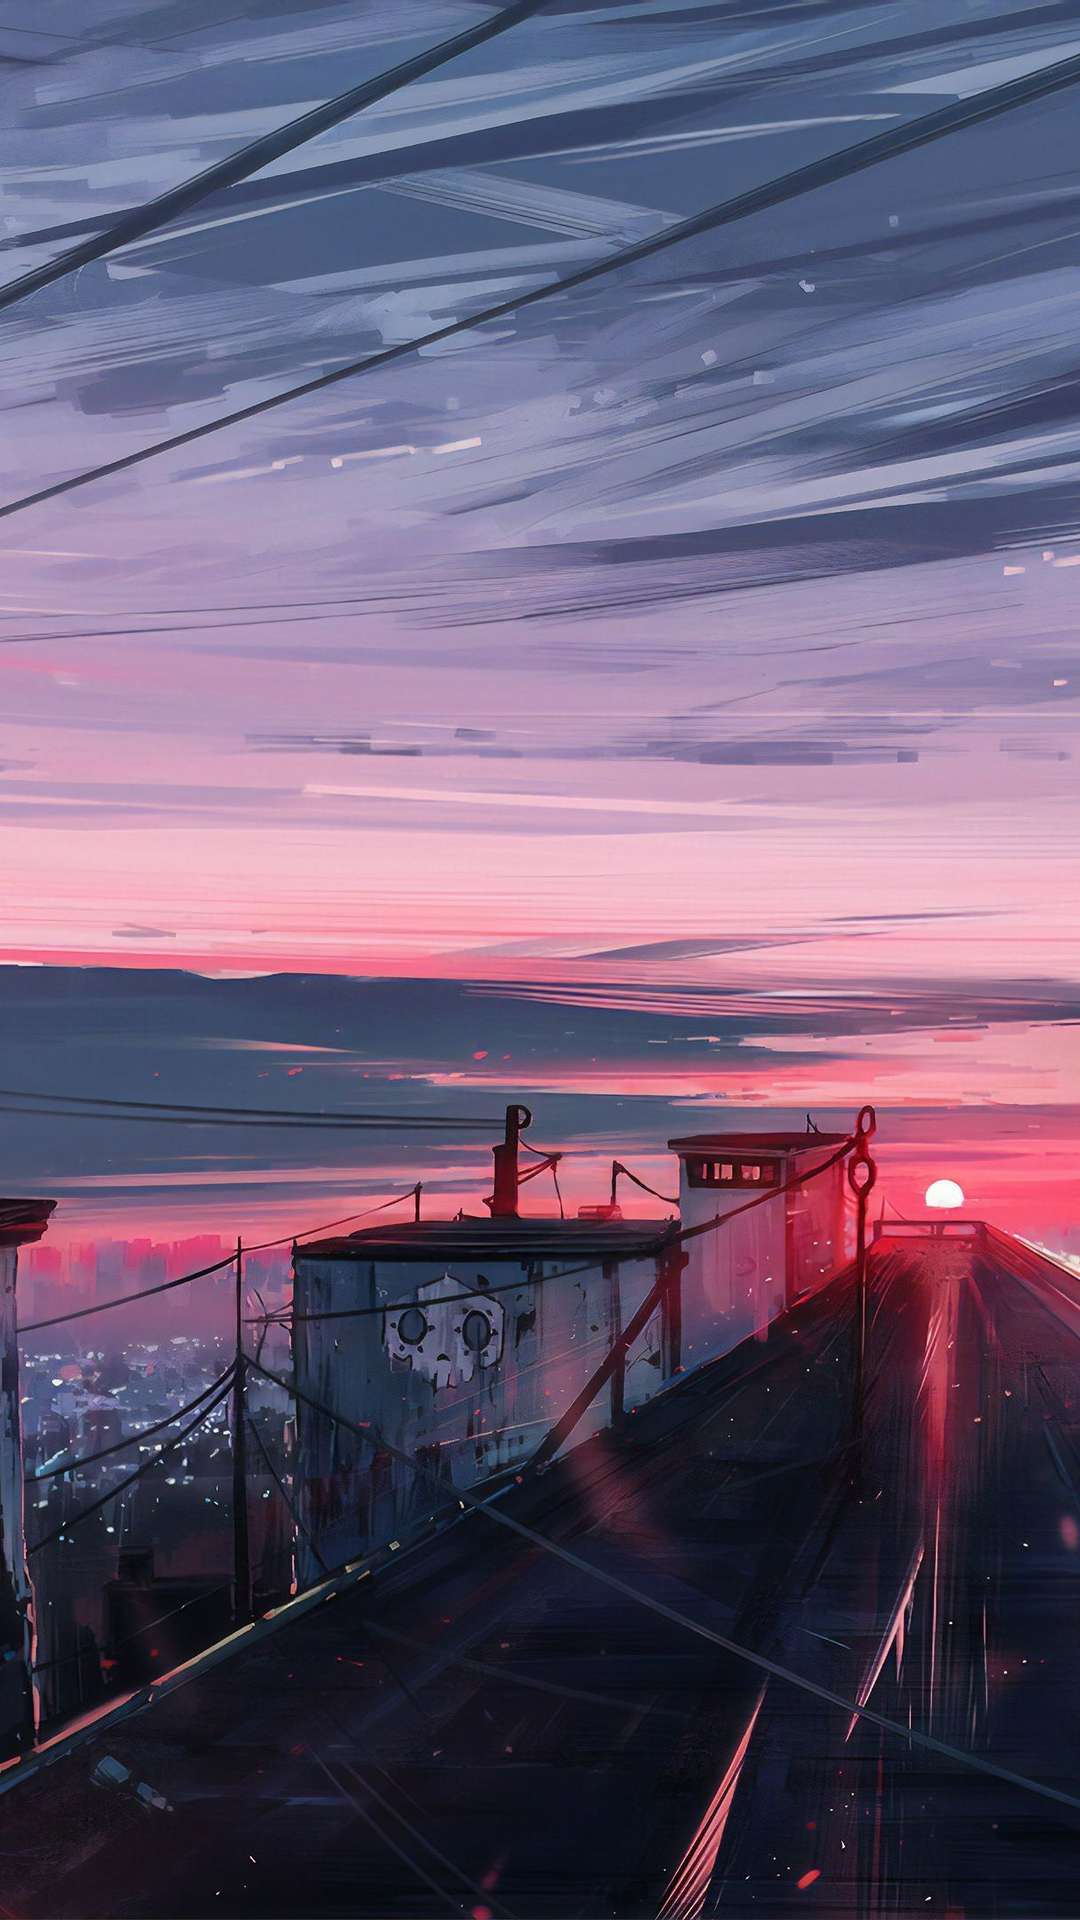 IPhone wallpaper anime train with high-resolution 1080x1920 pixel. You can use this wallpaper for your iPhone 5, 6, 7, 8, X, XS, XR backgrounds, Mobile Screensaver, or iPad Lock Screen - Anime sunset